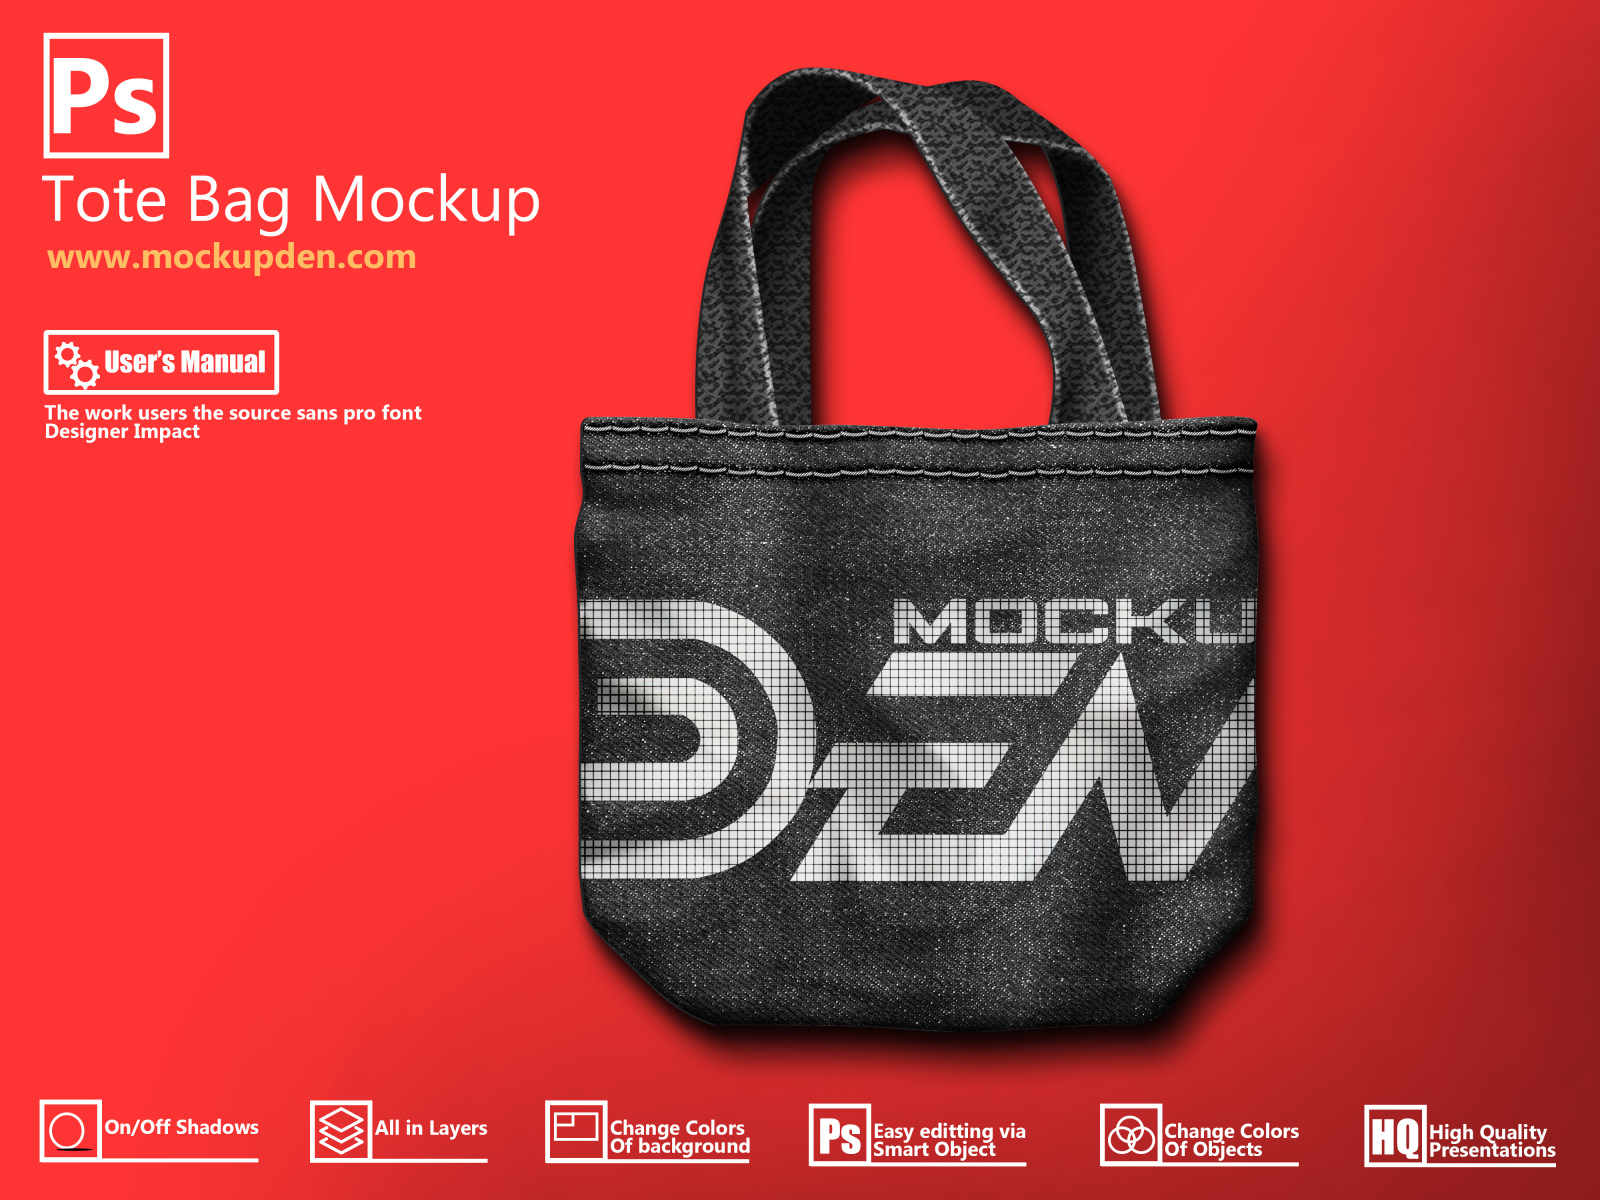 Download Free Abstract Print Tote bag Mockup | PSD Template Design by Mockup Den on Dribbble